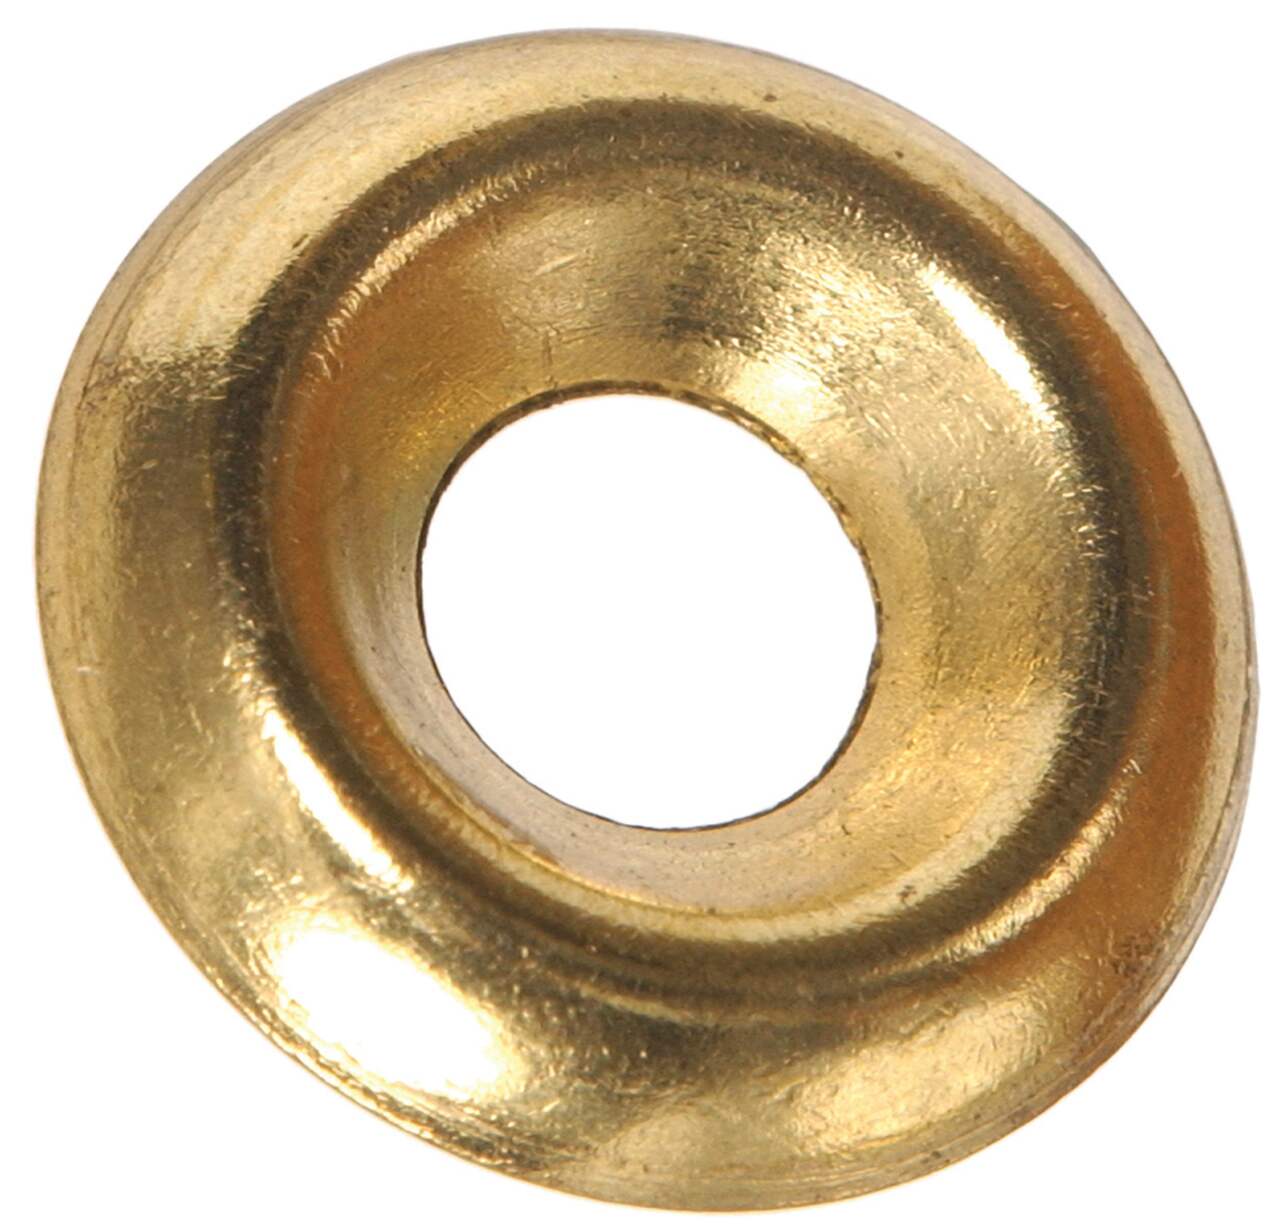 Hillman Flat Washers, For Decks and Fences, Brass-Finish, Assorted Sizes